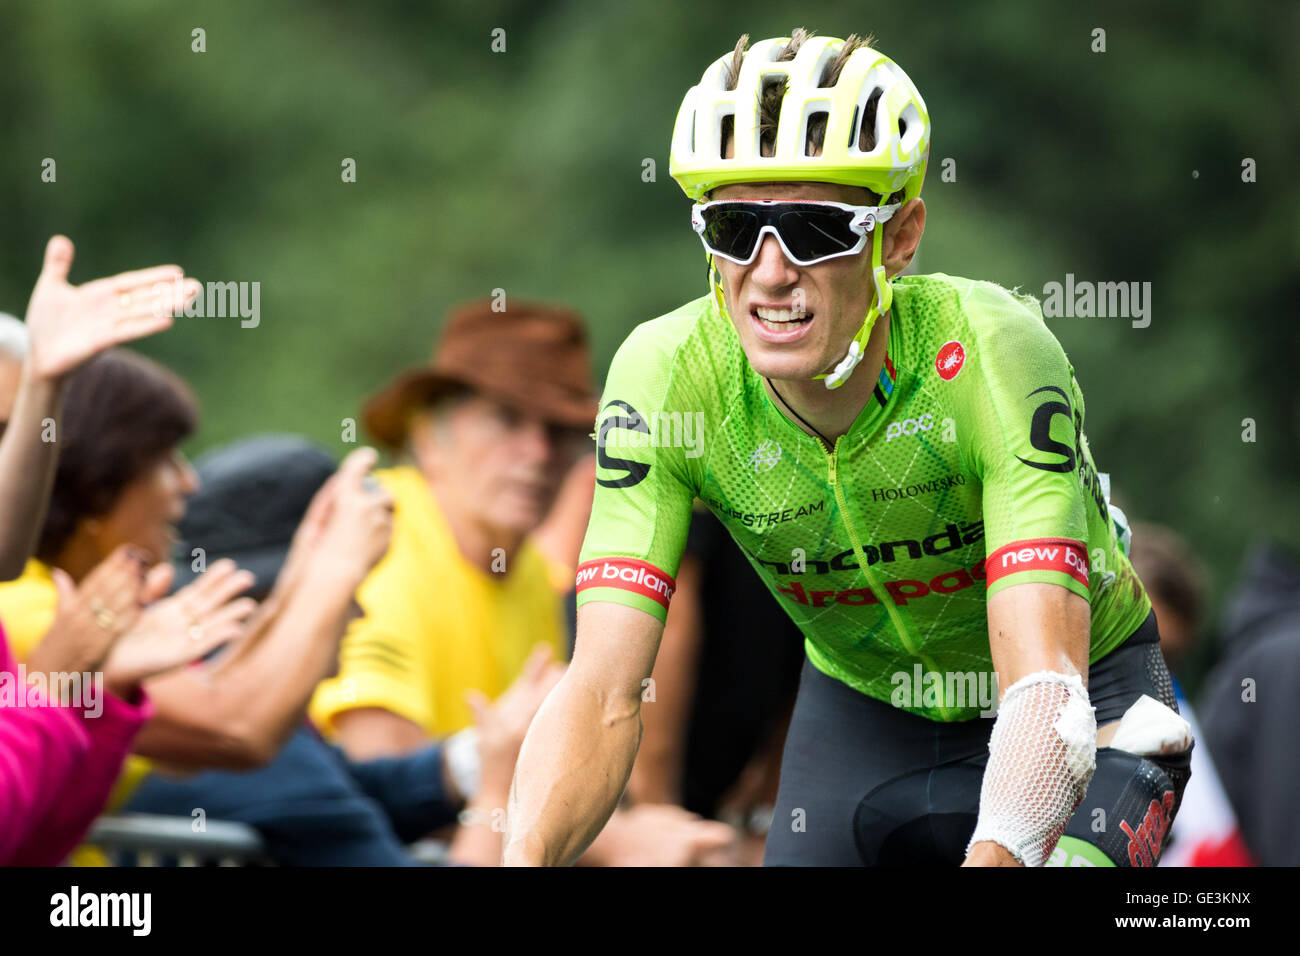 Tour de France. 22nd July, 2016. Saint-Gervais-les-Bains, FR. Pierre Rolland (Cannondale-Drapac Pro Cycling) approaches the final 500m of the finishing climb to Saint-Gervais. Rolland crashed earlier in the stage, leaving cuts and bruises on his left side and tearing his cycling kit. John Kavouris/Alamy Live News Stock Photo